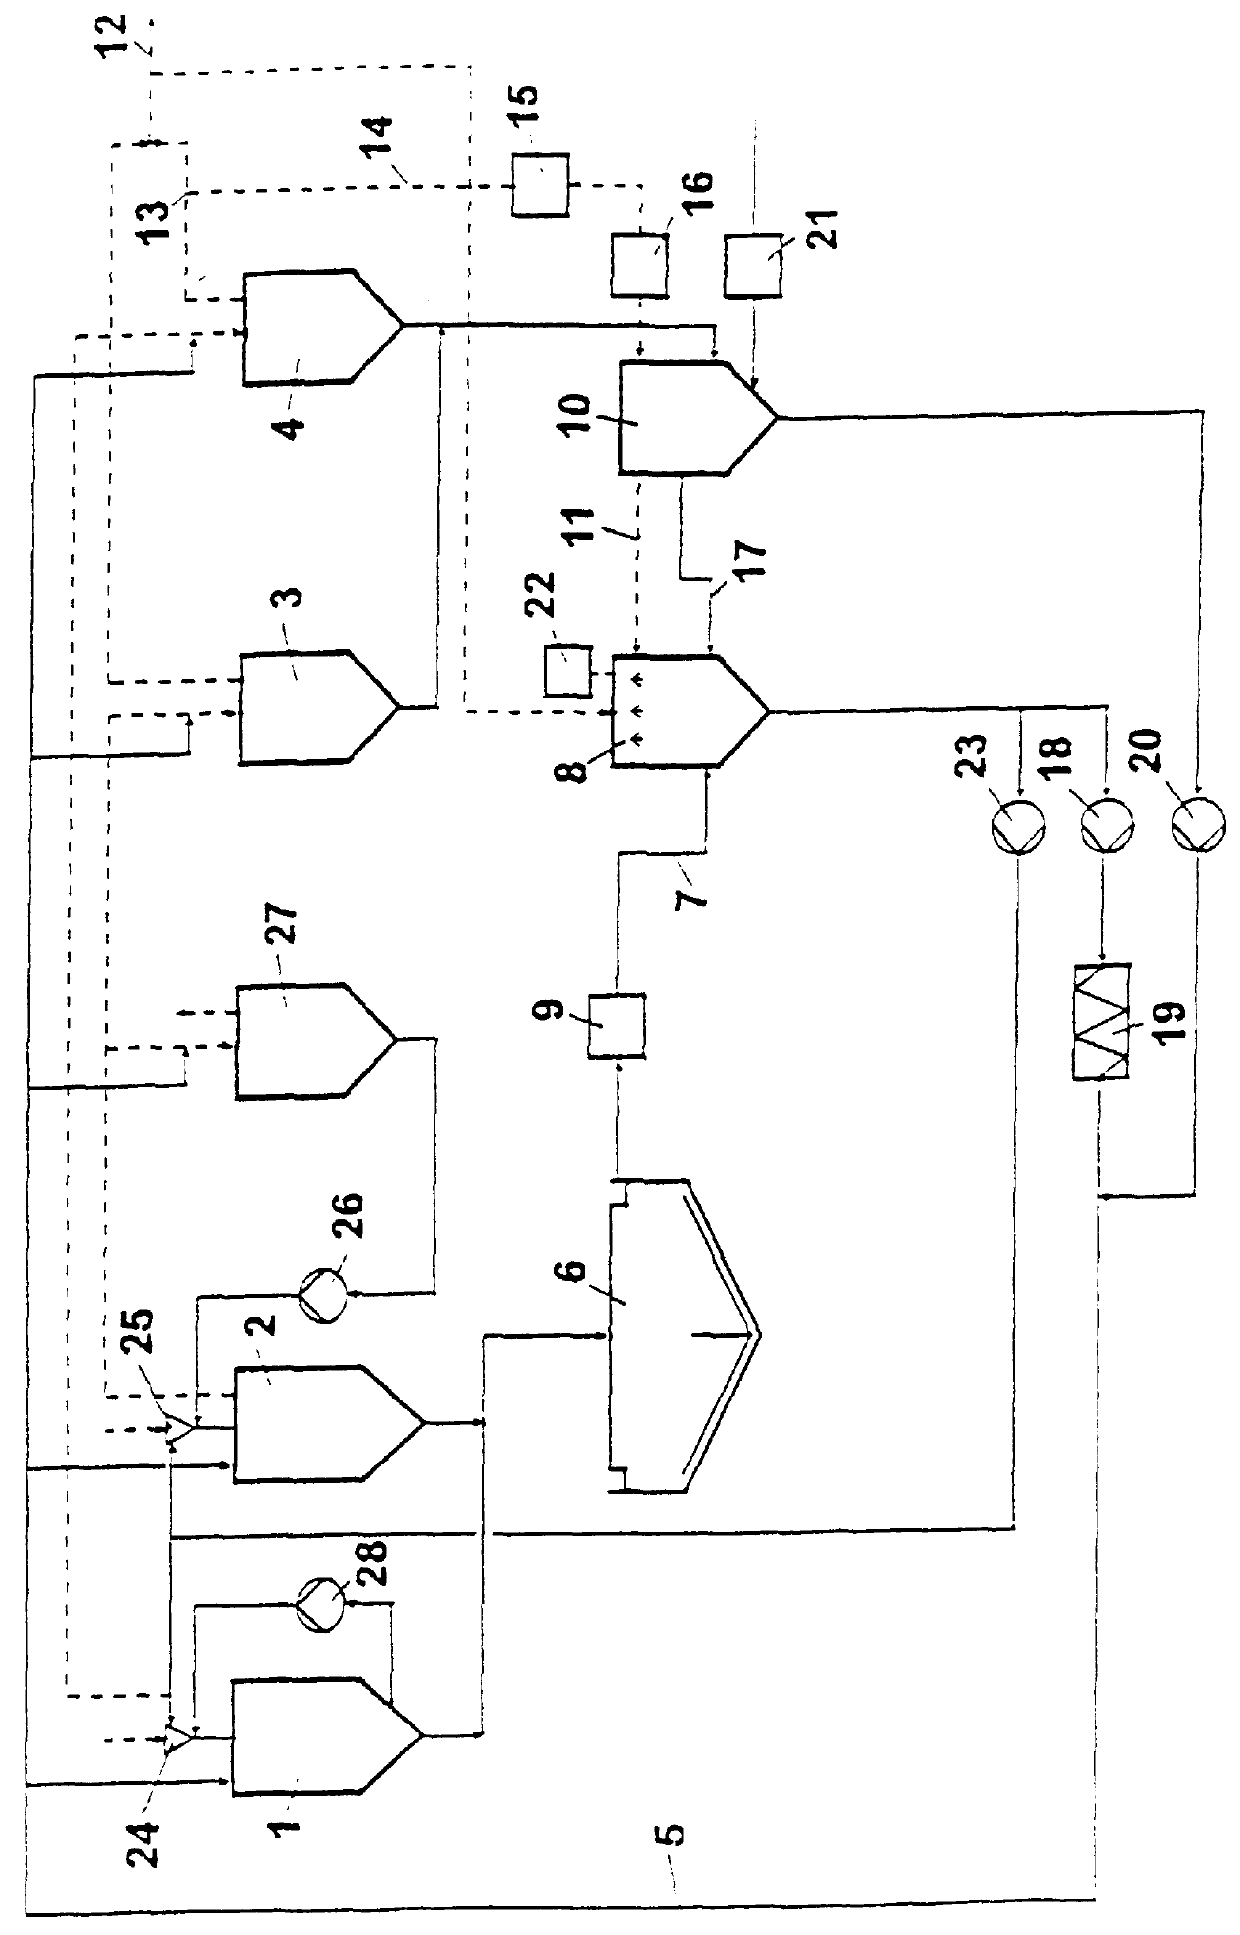 Process for treating the scrubbing water from the gas scrubbing process in an iron ore reduction plant